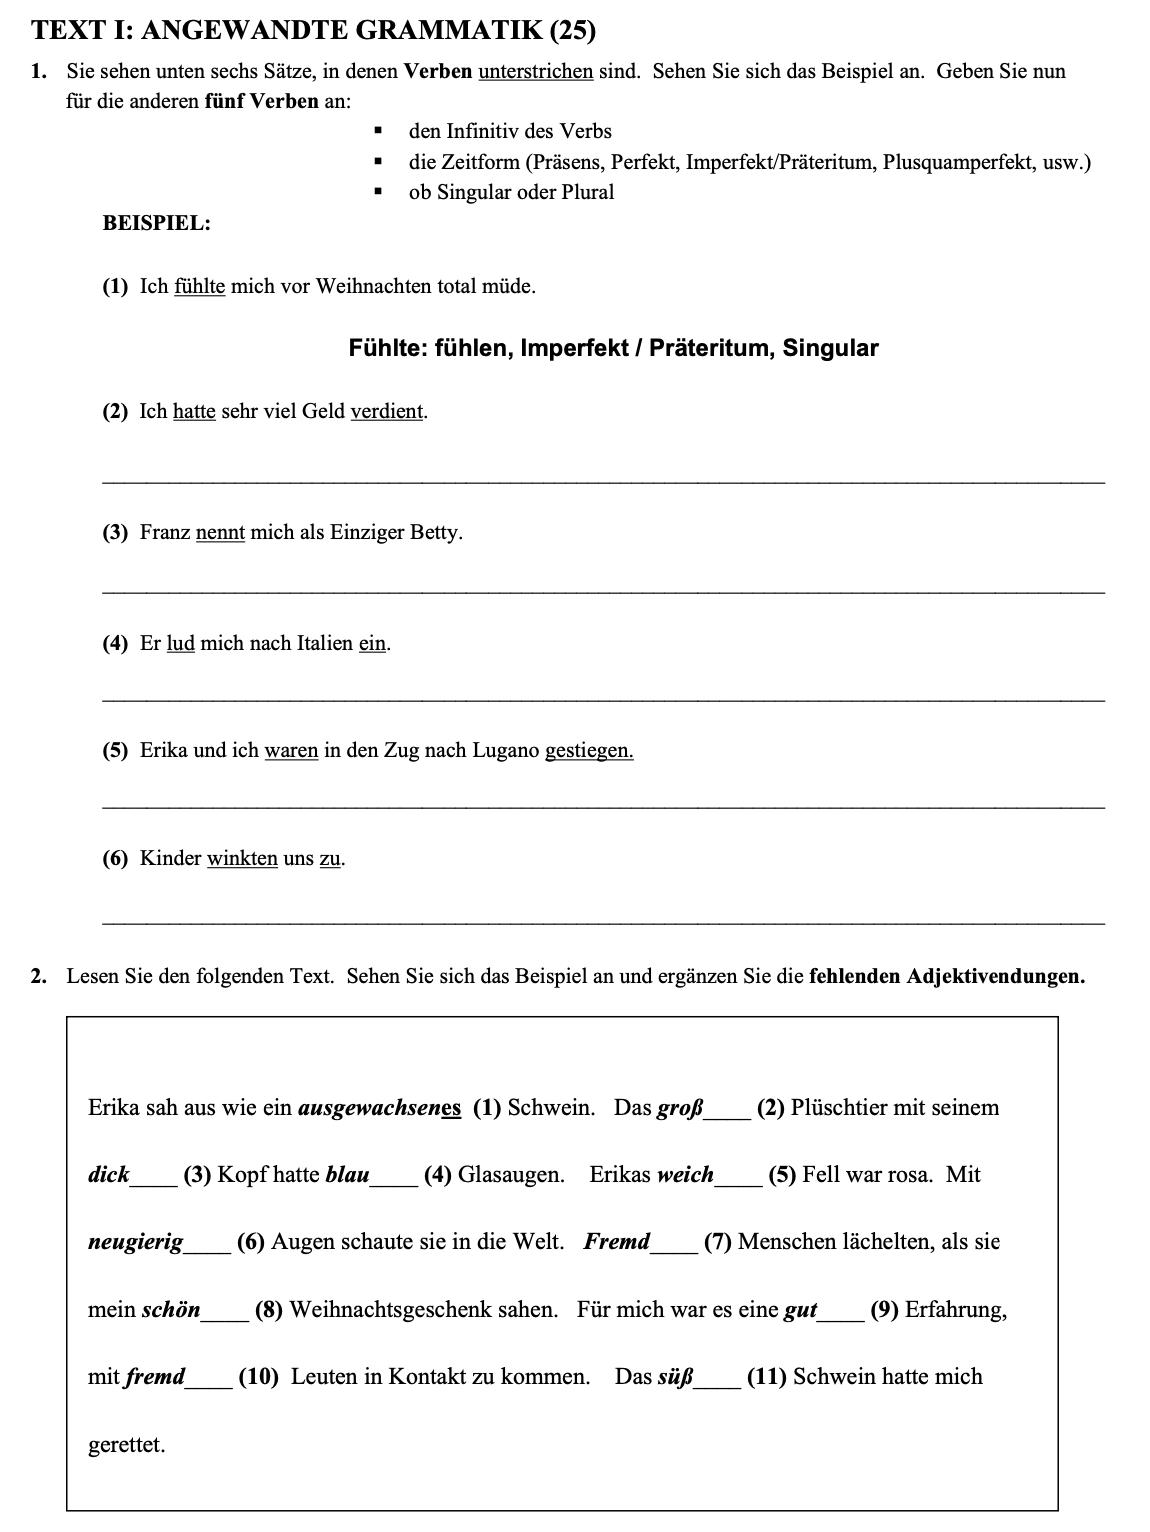 an image of the question 2013 Text I Angewandte Grammatik which is about the topic grammatik and the subject is Leaving Certificate german